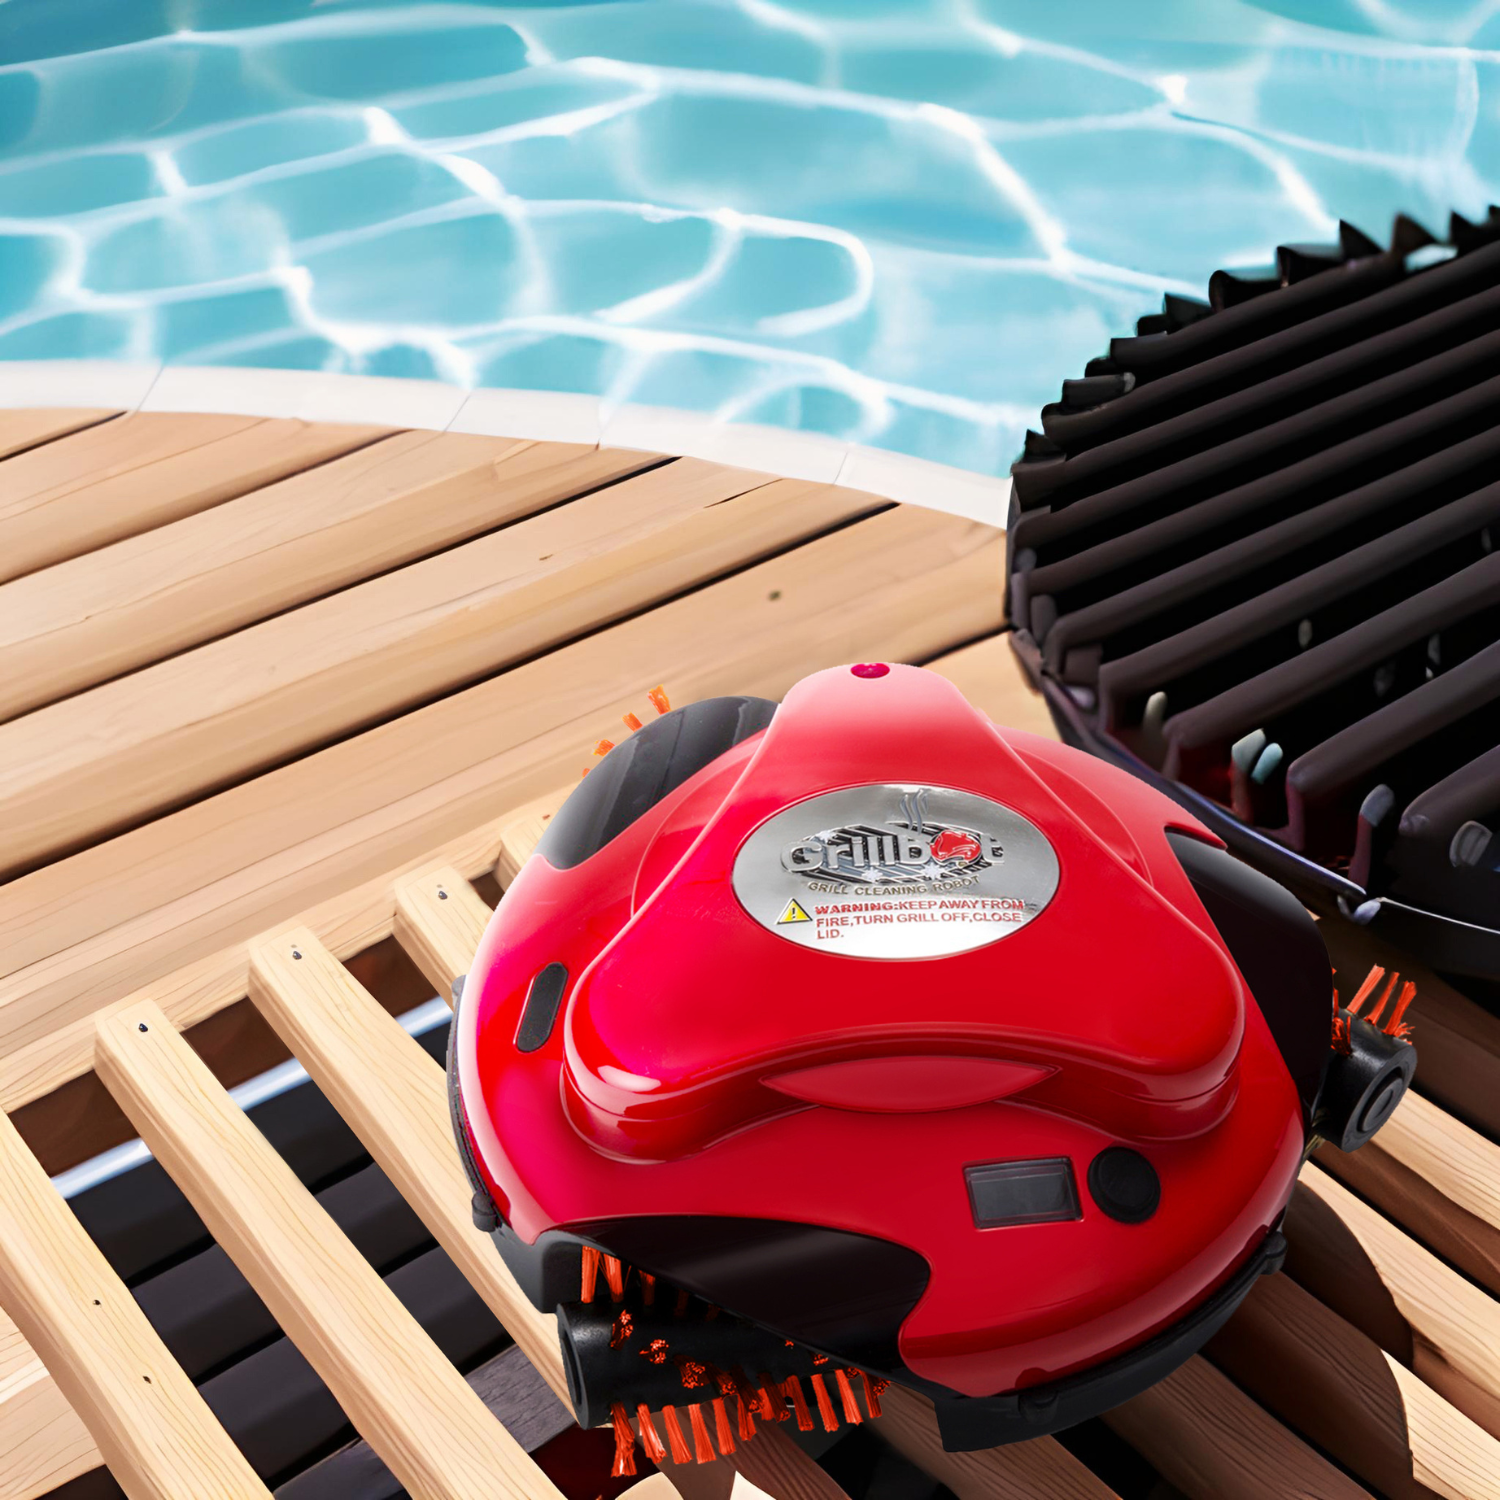 Find the best price on Grillbot Grill Cleaning Robot